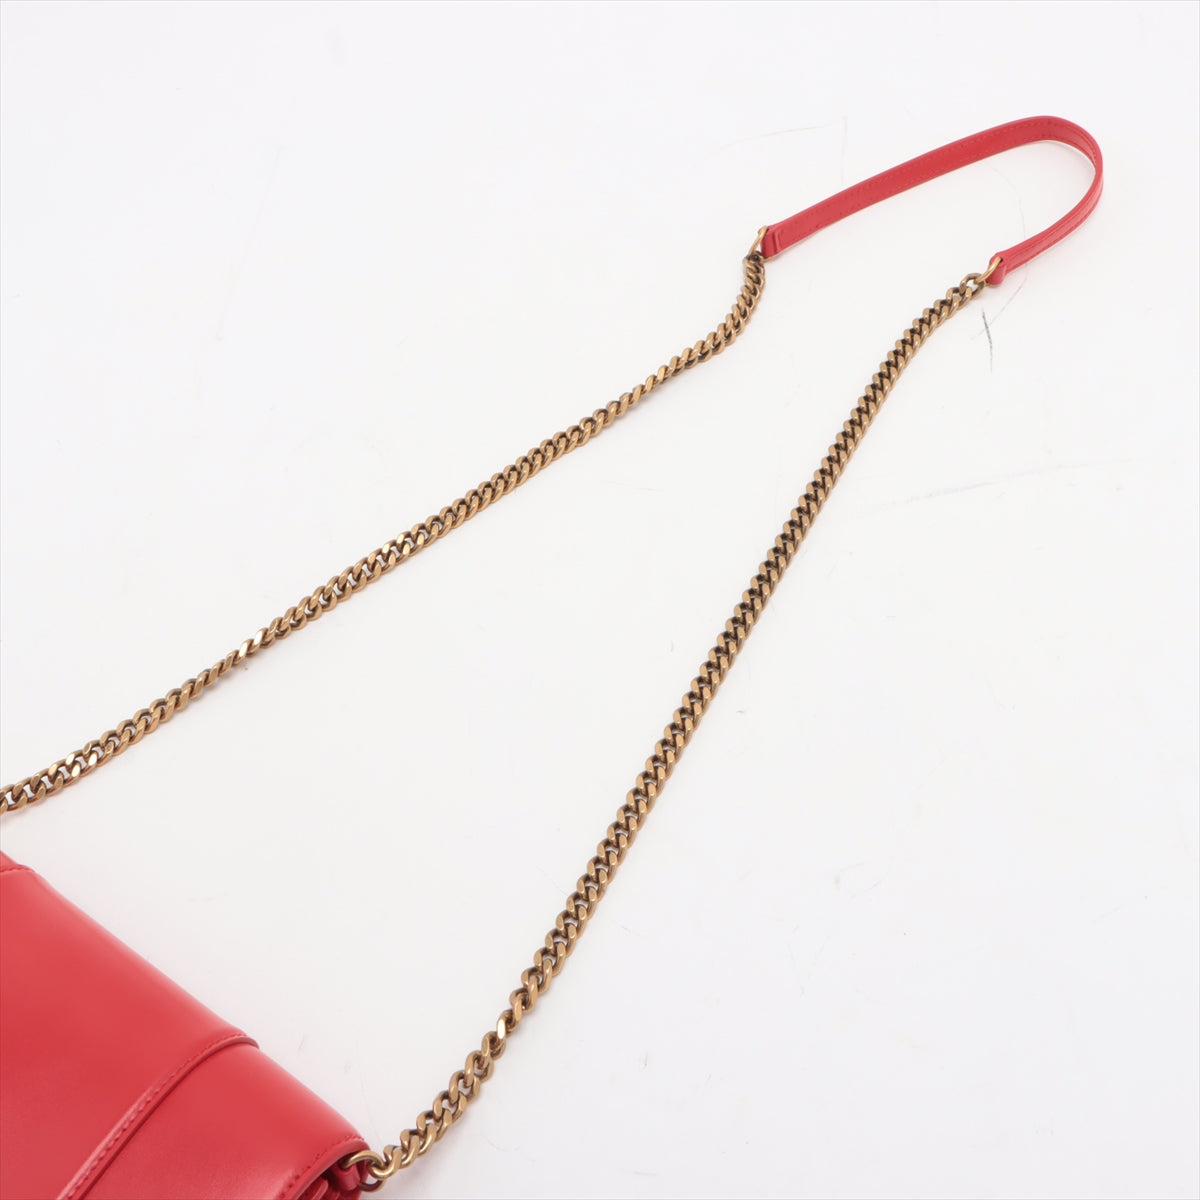 Balenciaga Hourglass Leather Chain Shoulder Bag Red 644973